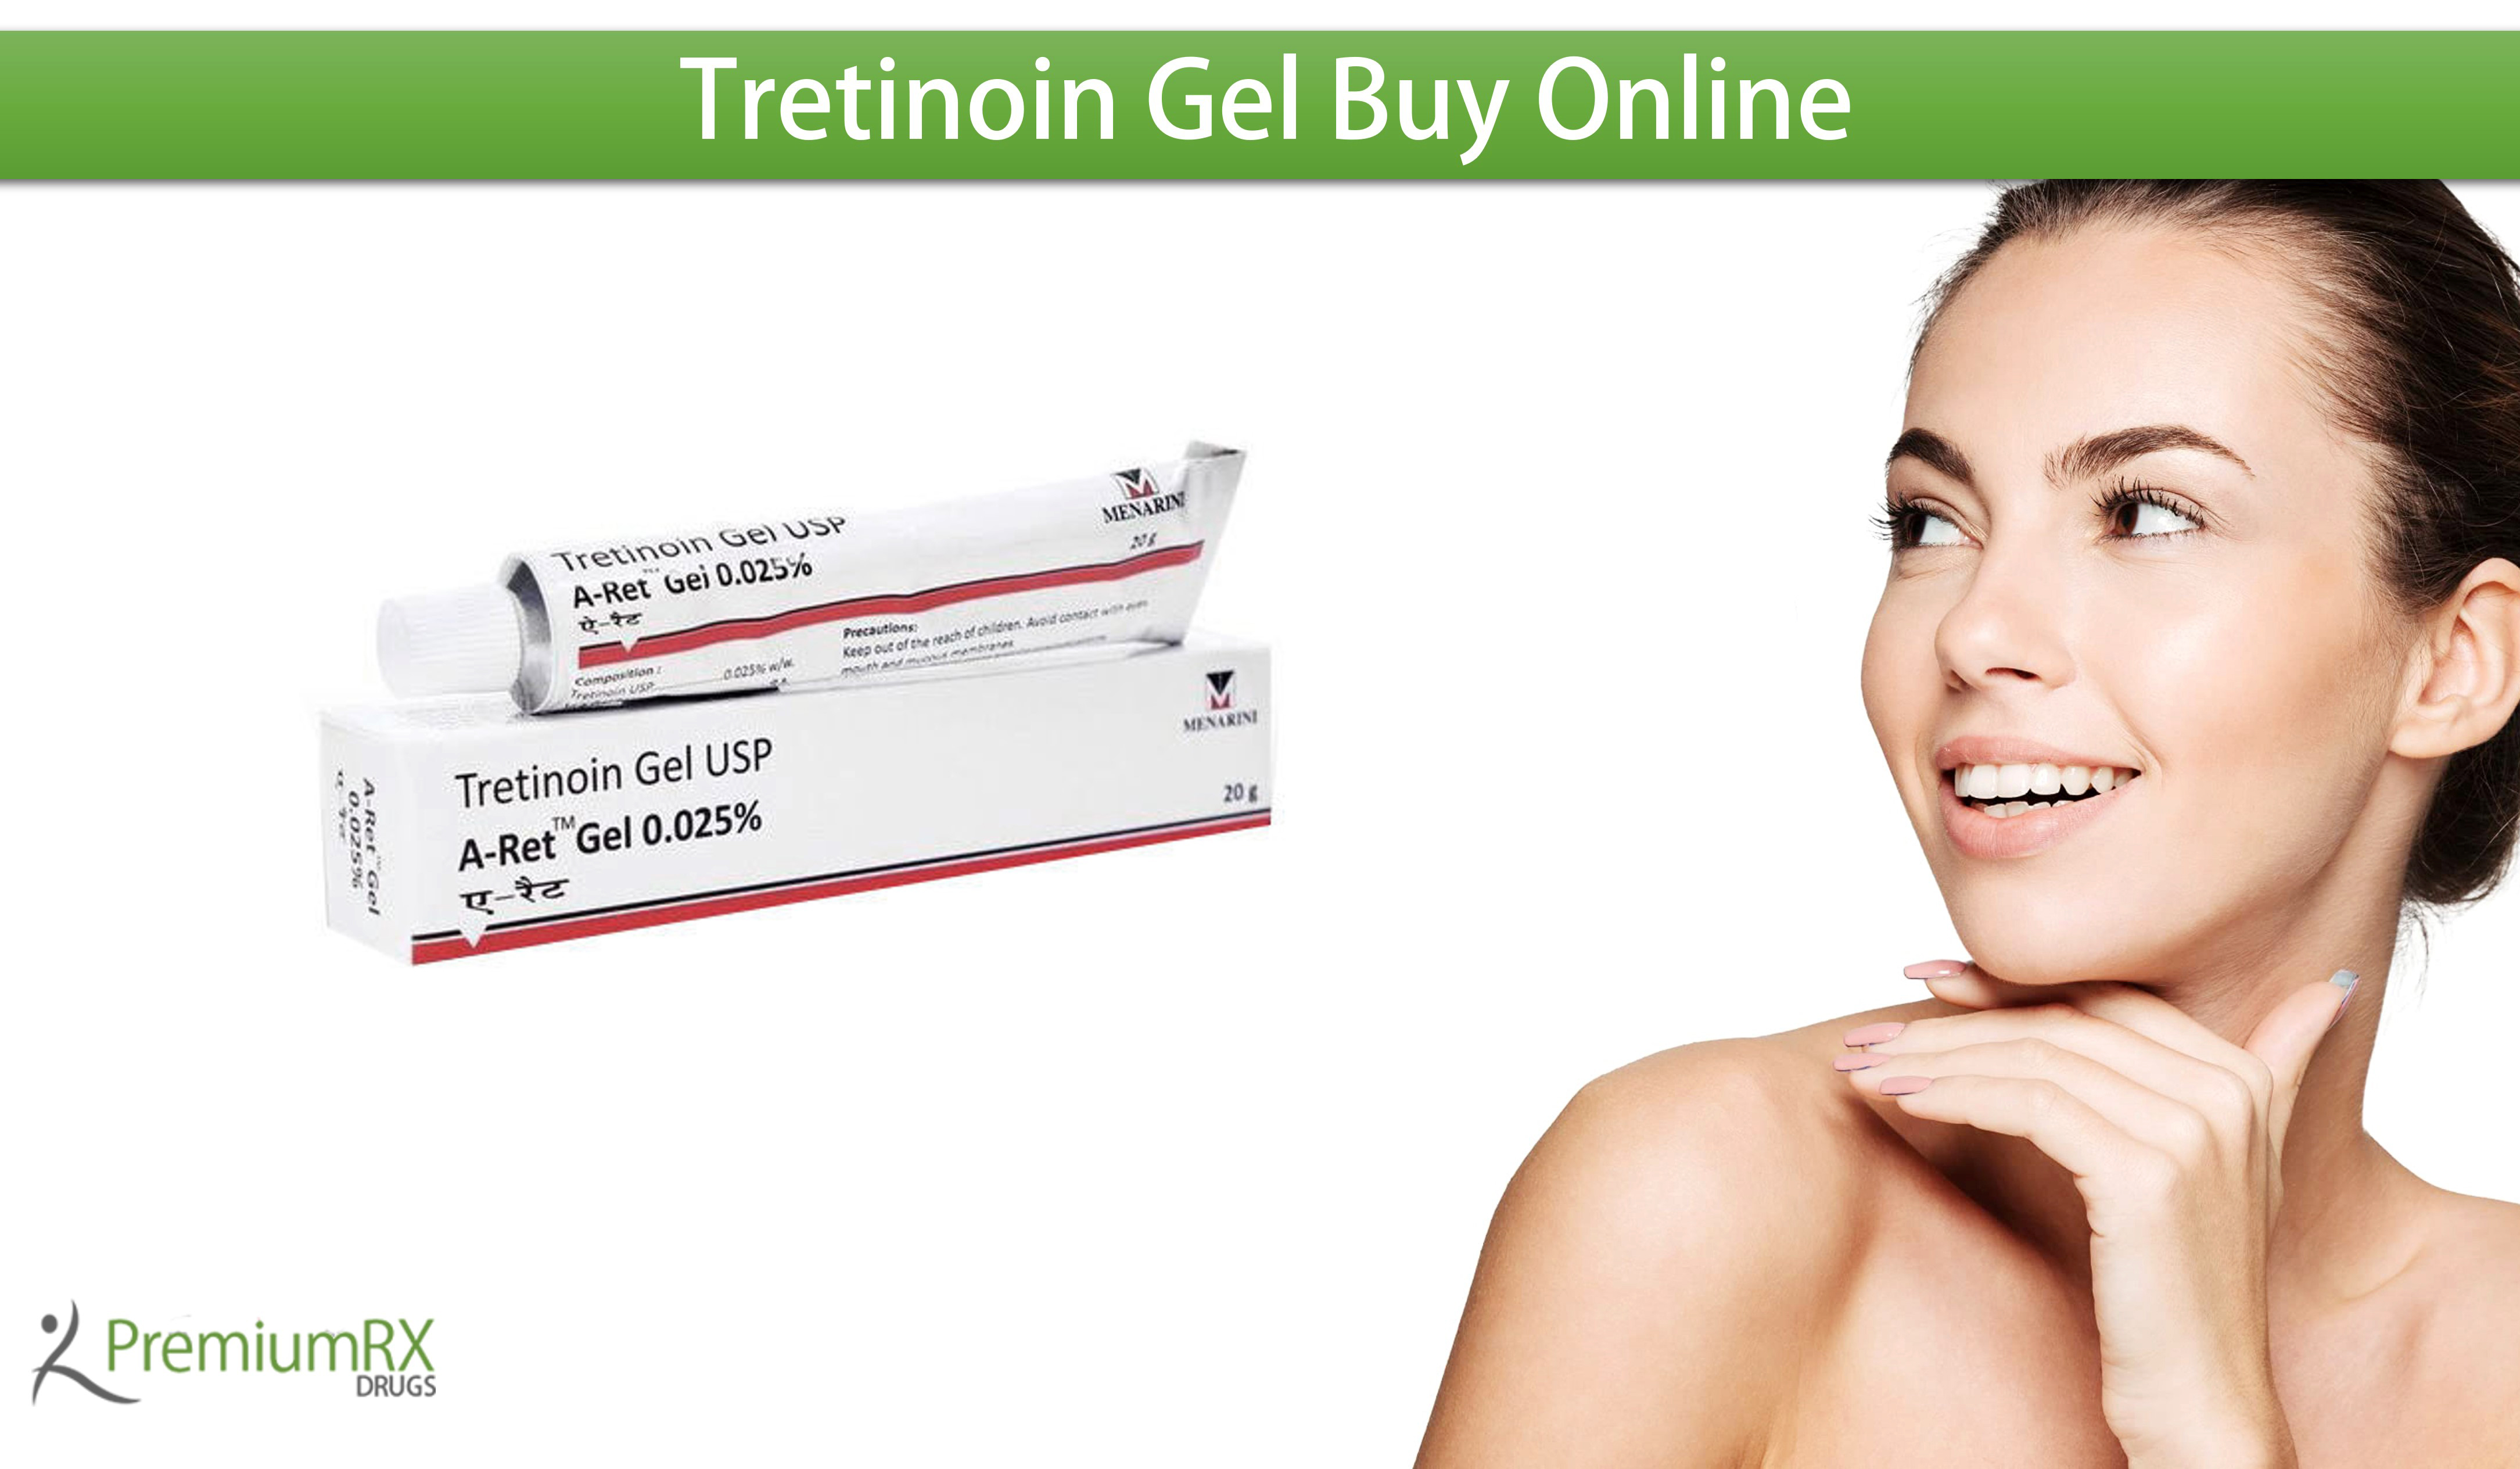 What can I use instead of Tretinoin?